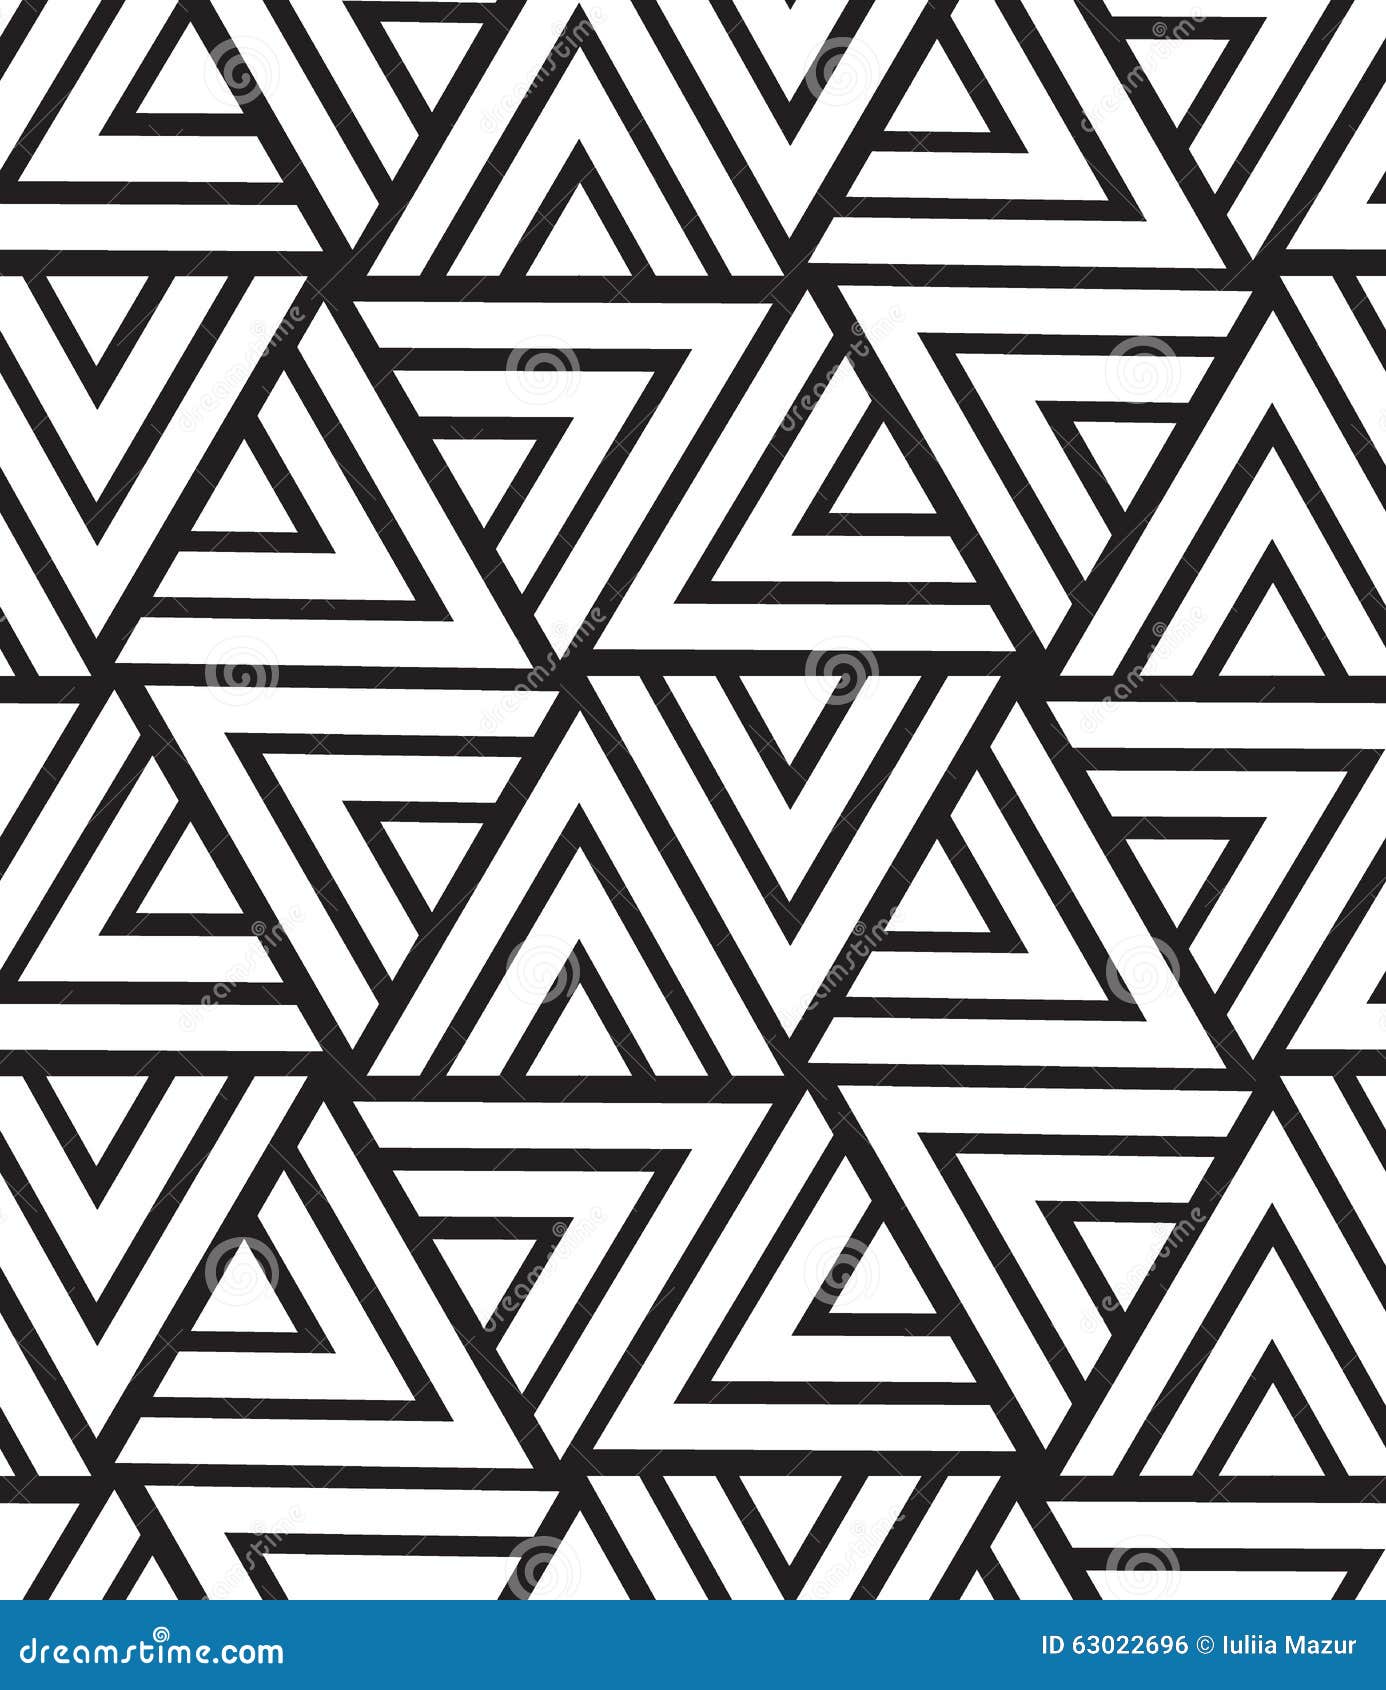 Vector Geometric Seamless Pattern. Modern Triangle Texture, Repeating ...